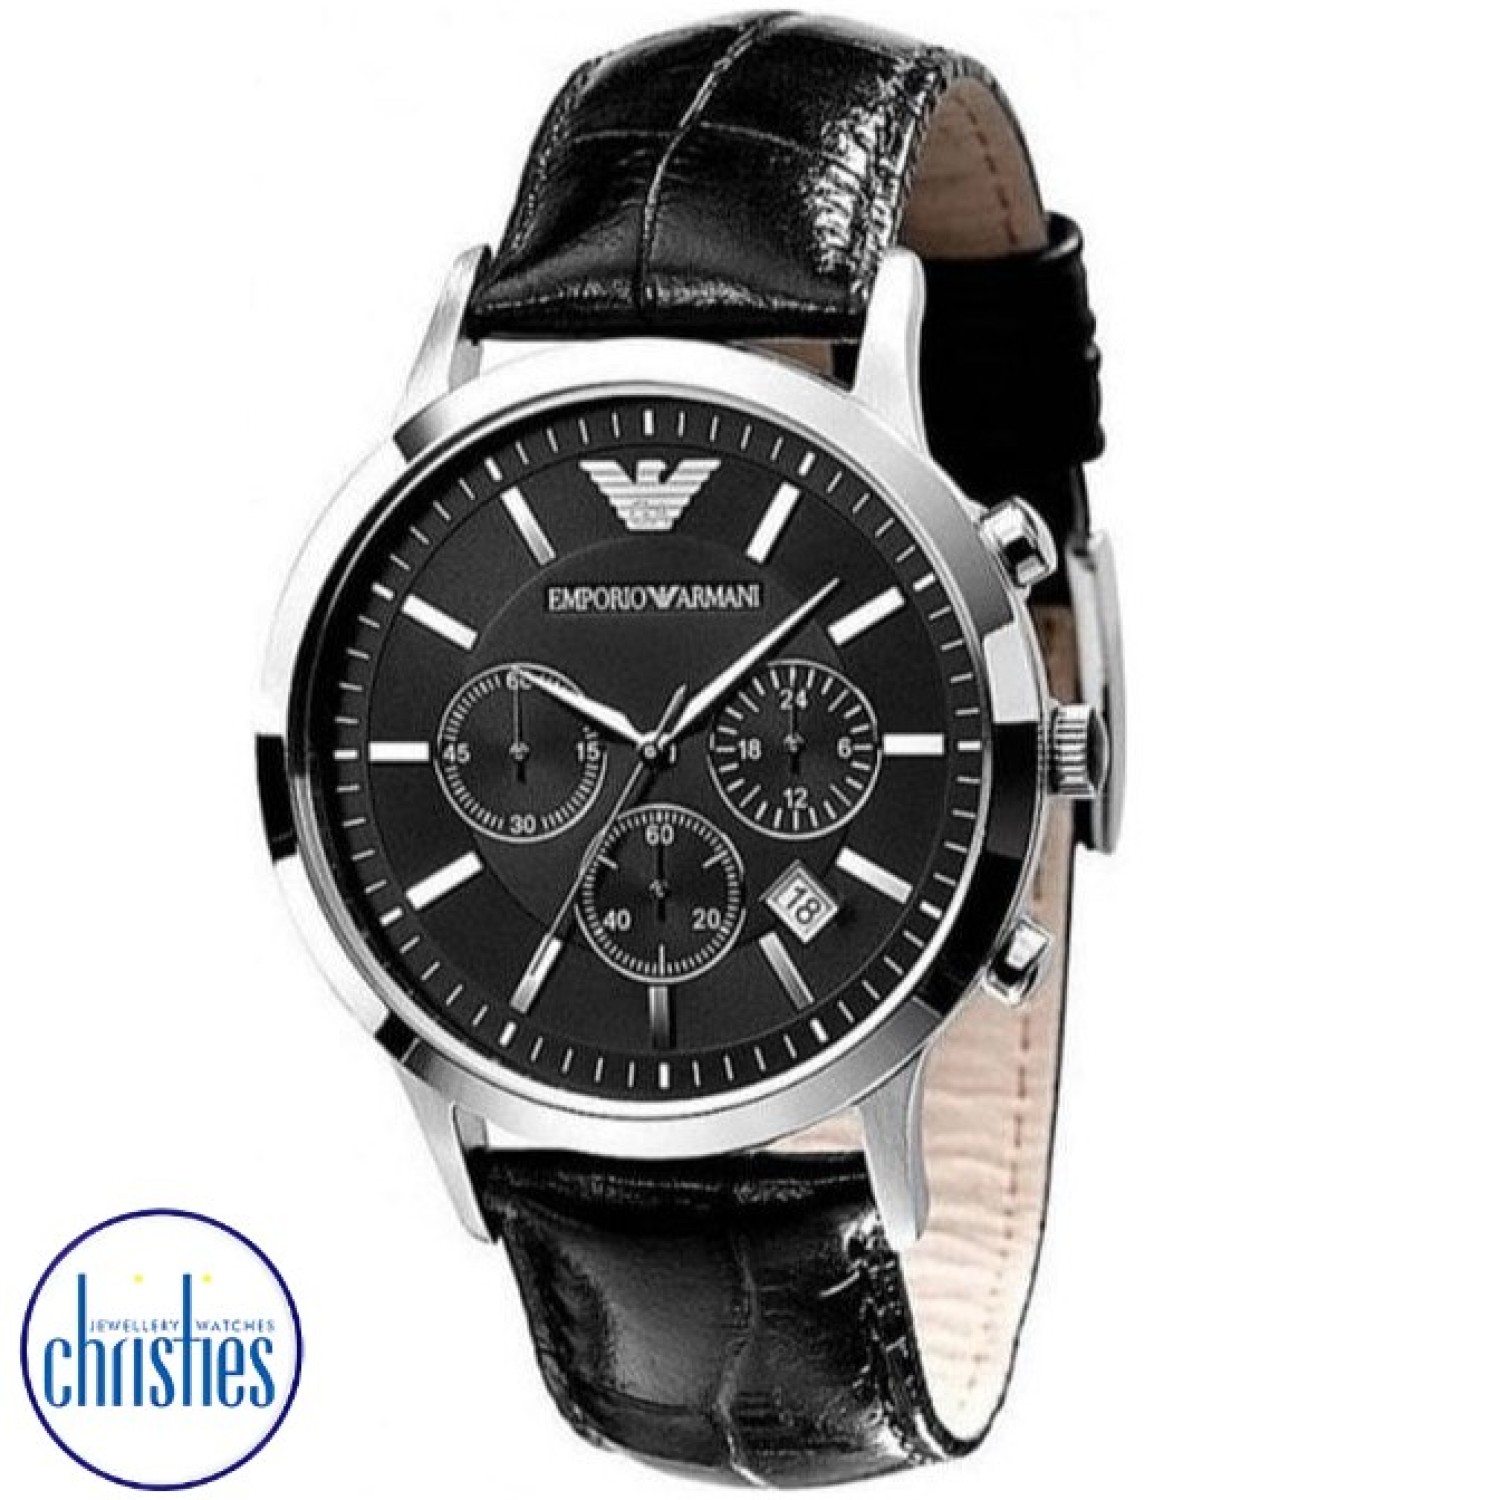 AR2447 Emporio Armani Mens Chronograph Watch. The  AR2447 Mens Emporio Armani watch has a stainless steel case and clear  black dial with silver baton hour markers and other elegant silver touches. Also features chronograph, date function and powered by a